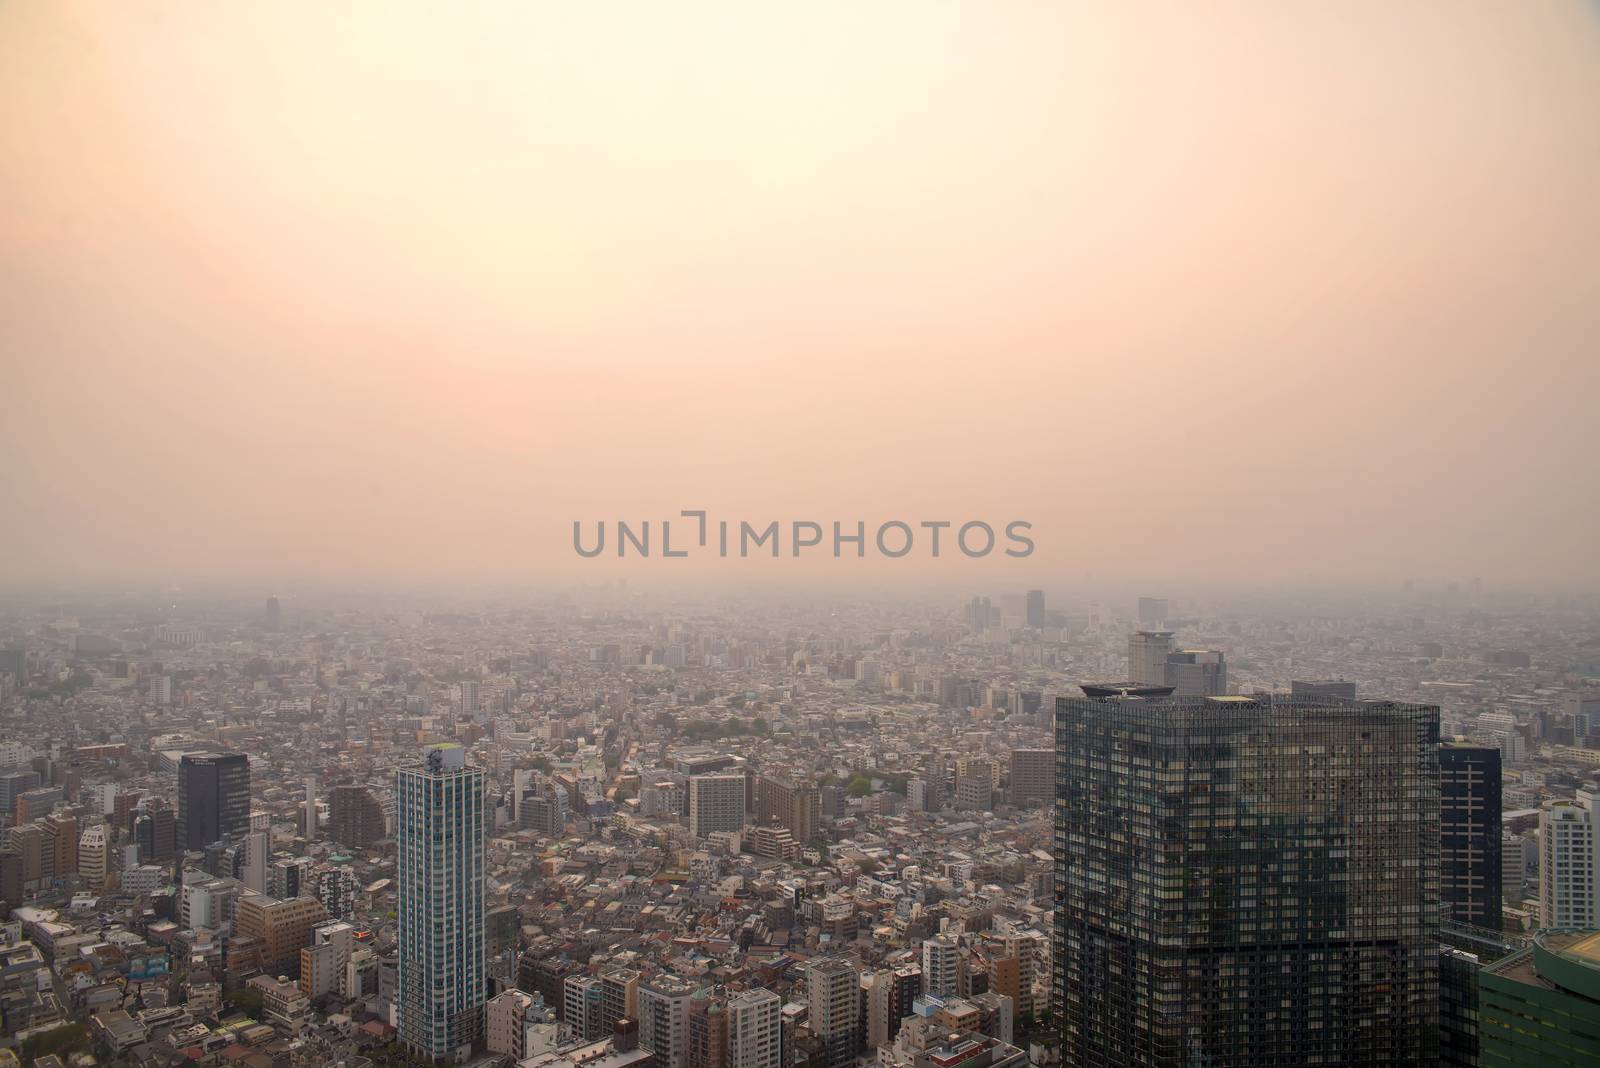 Cityscape of Tokyo, the view from free observator of Tokyo Metroplitan Government building at 45th floor.